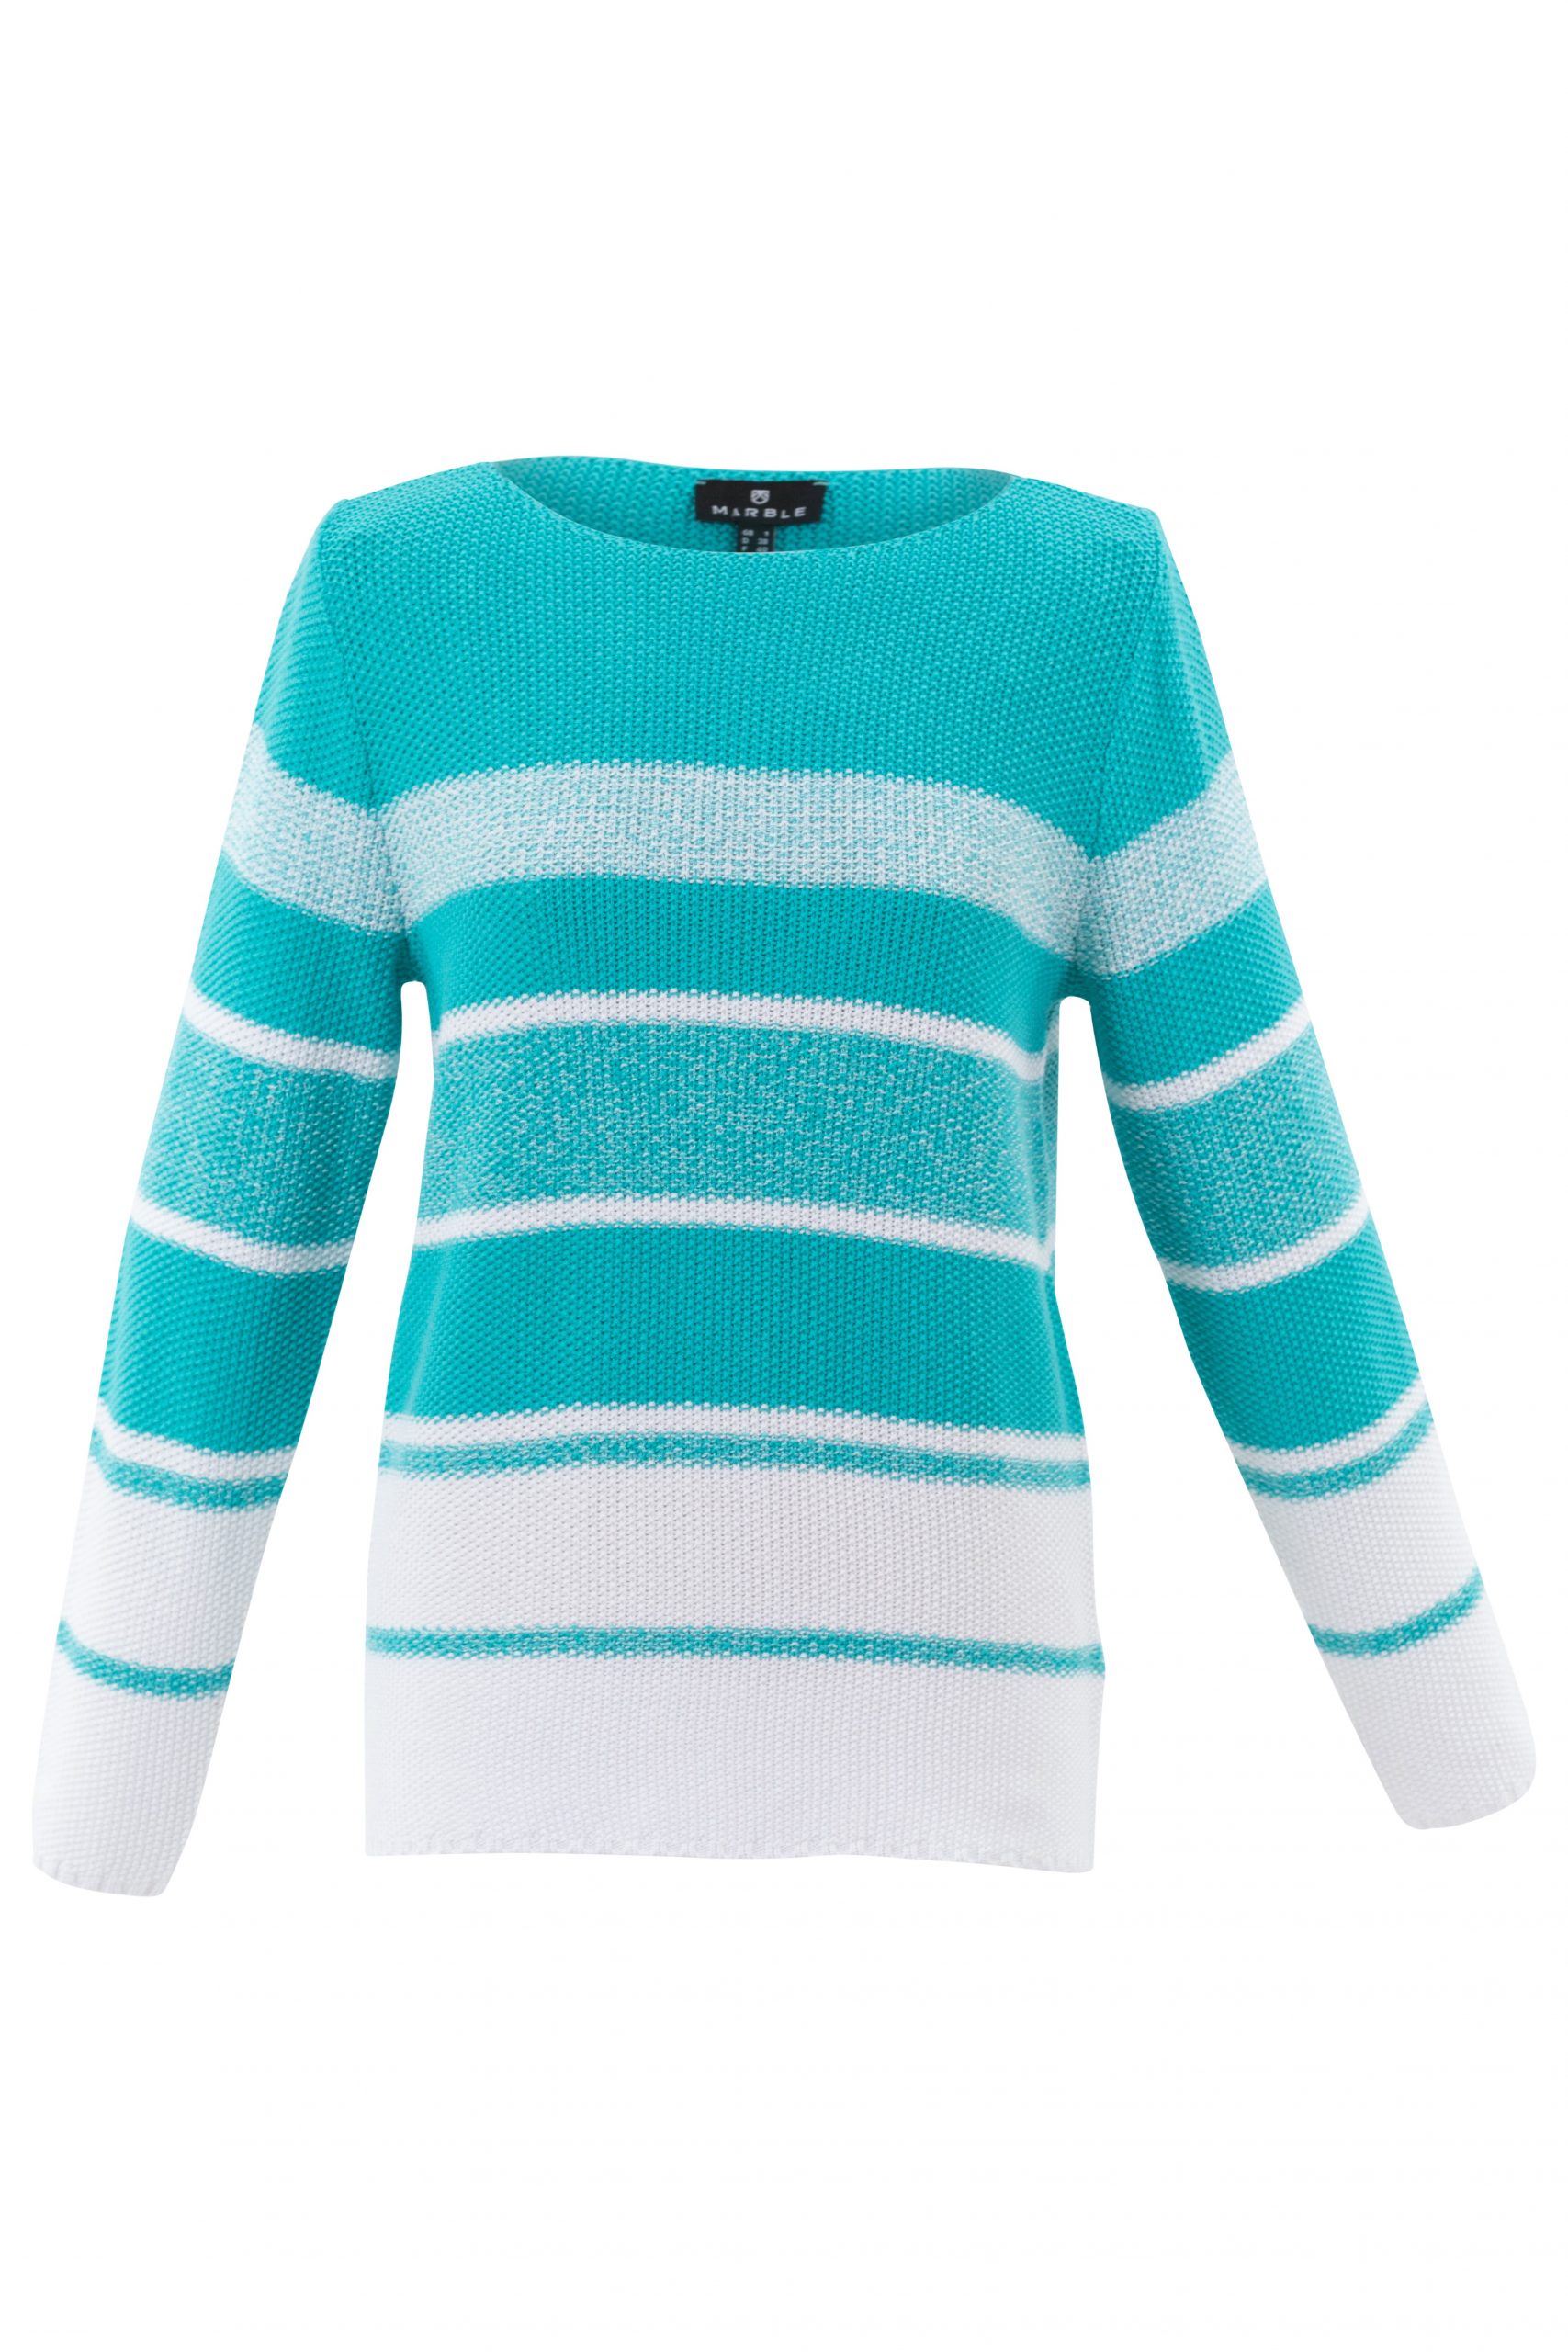 Marble 7445 151 Sweater